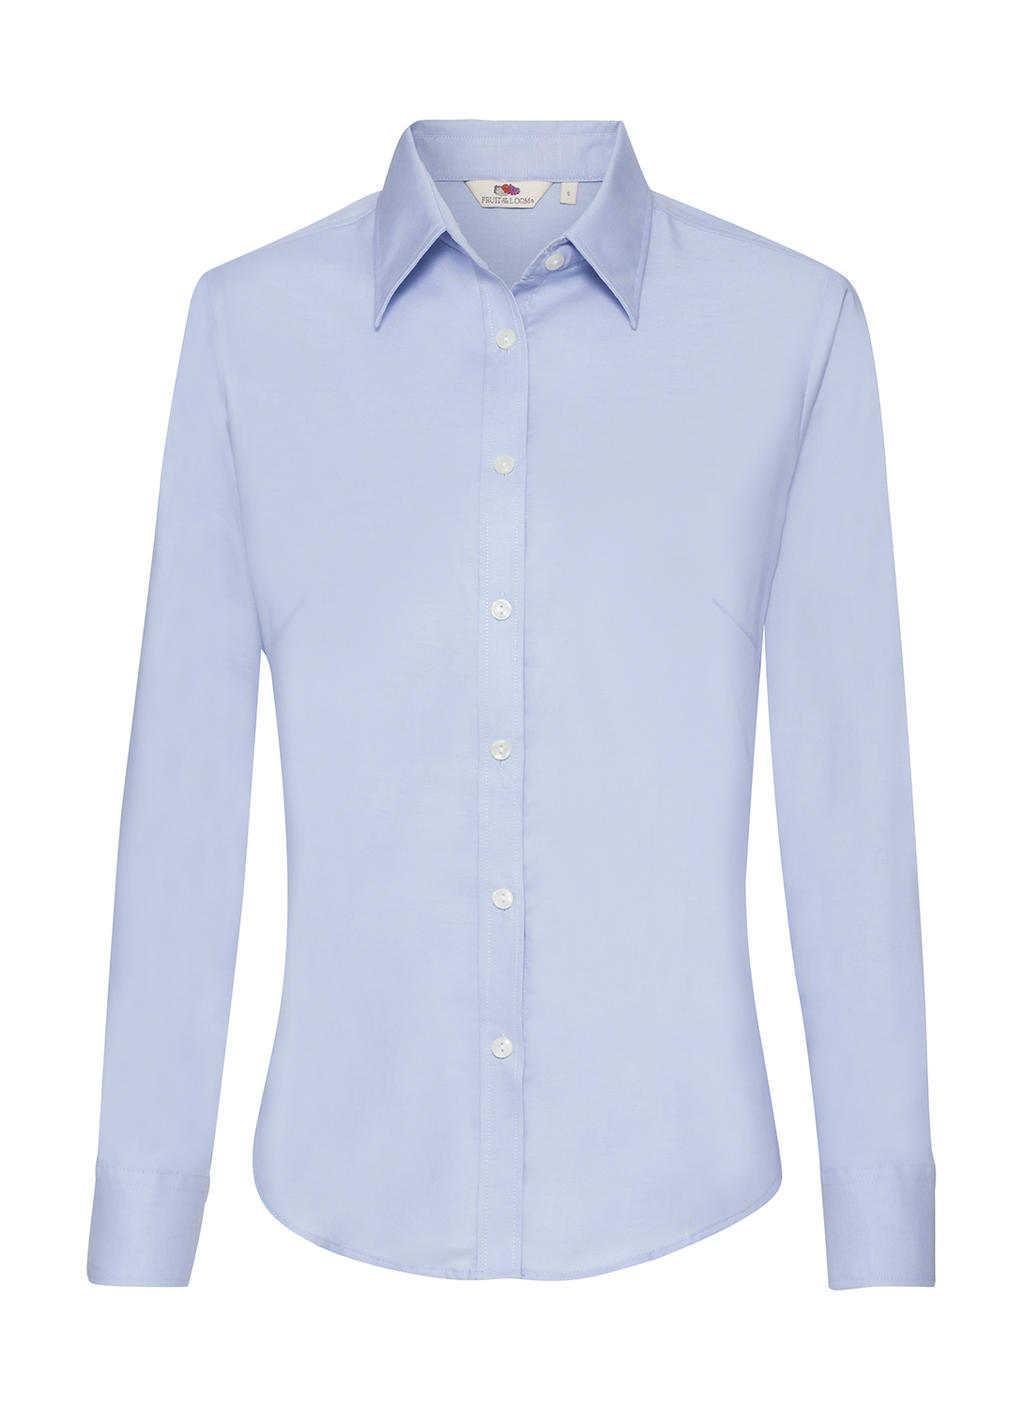  Ladies Oxford Shirt LS in Farbe Oxford Blue